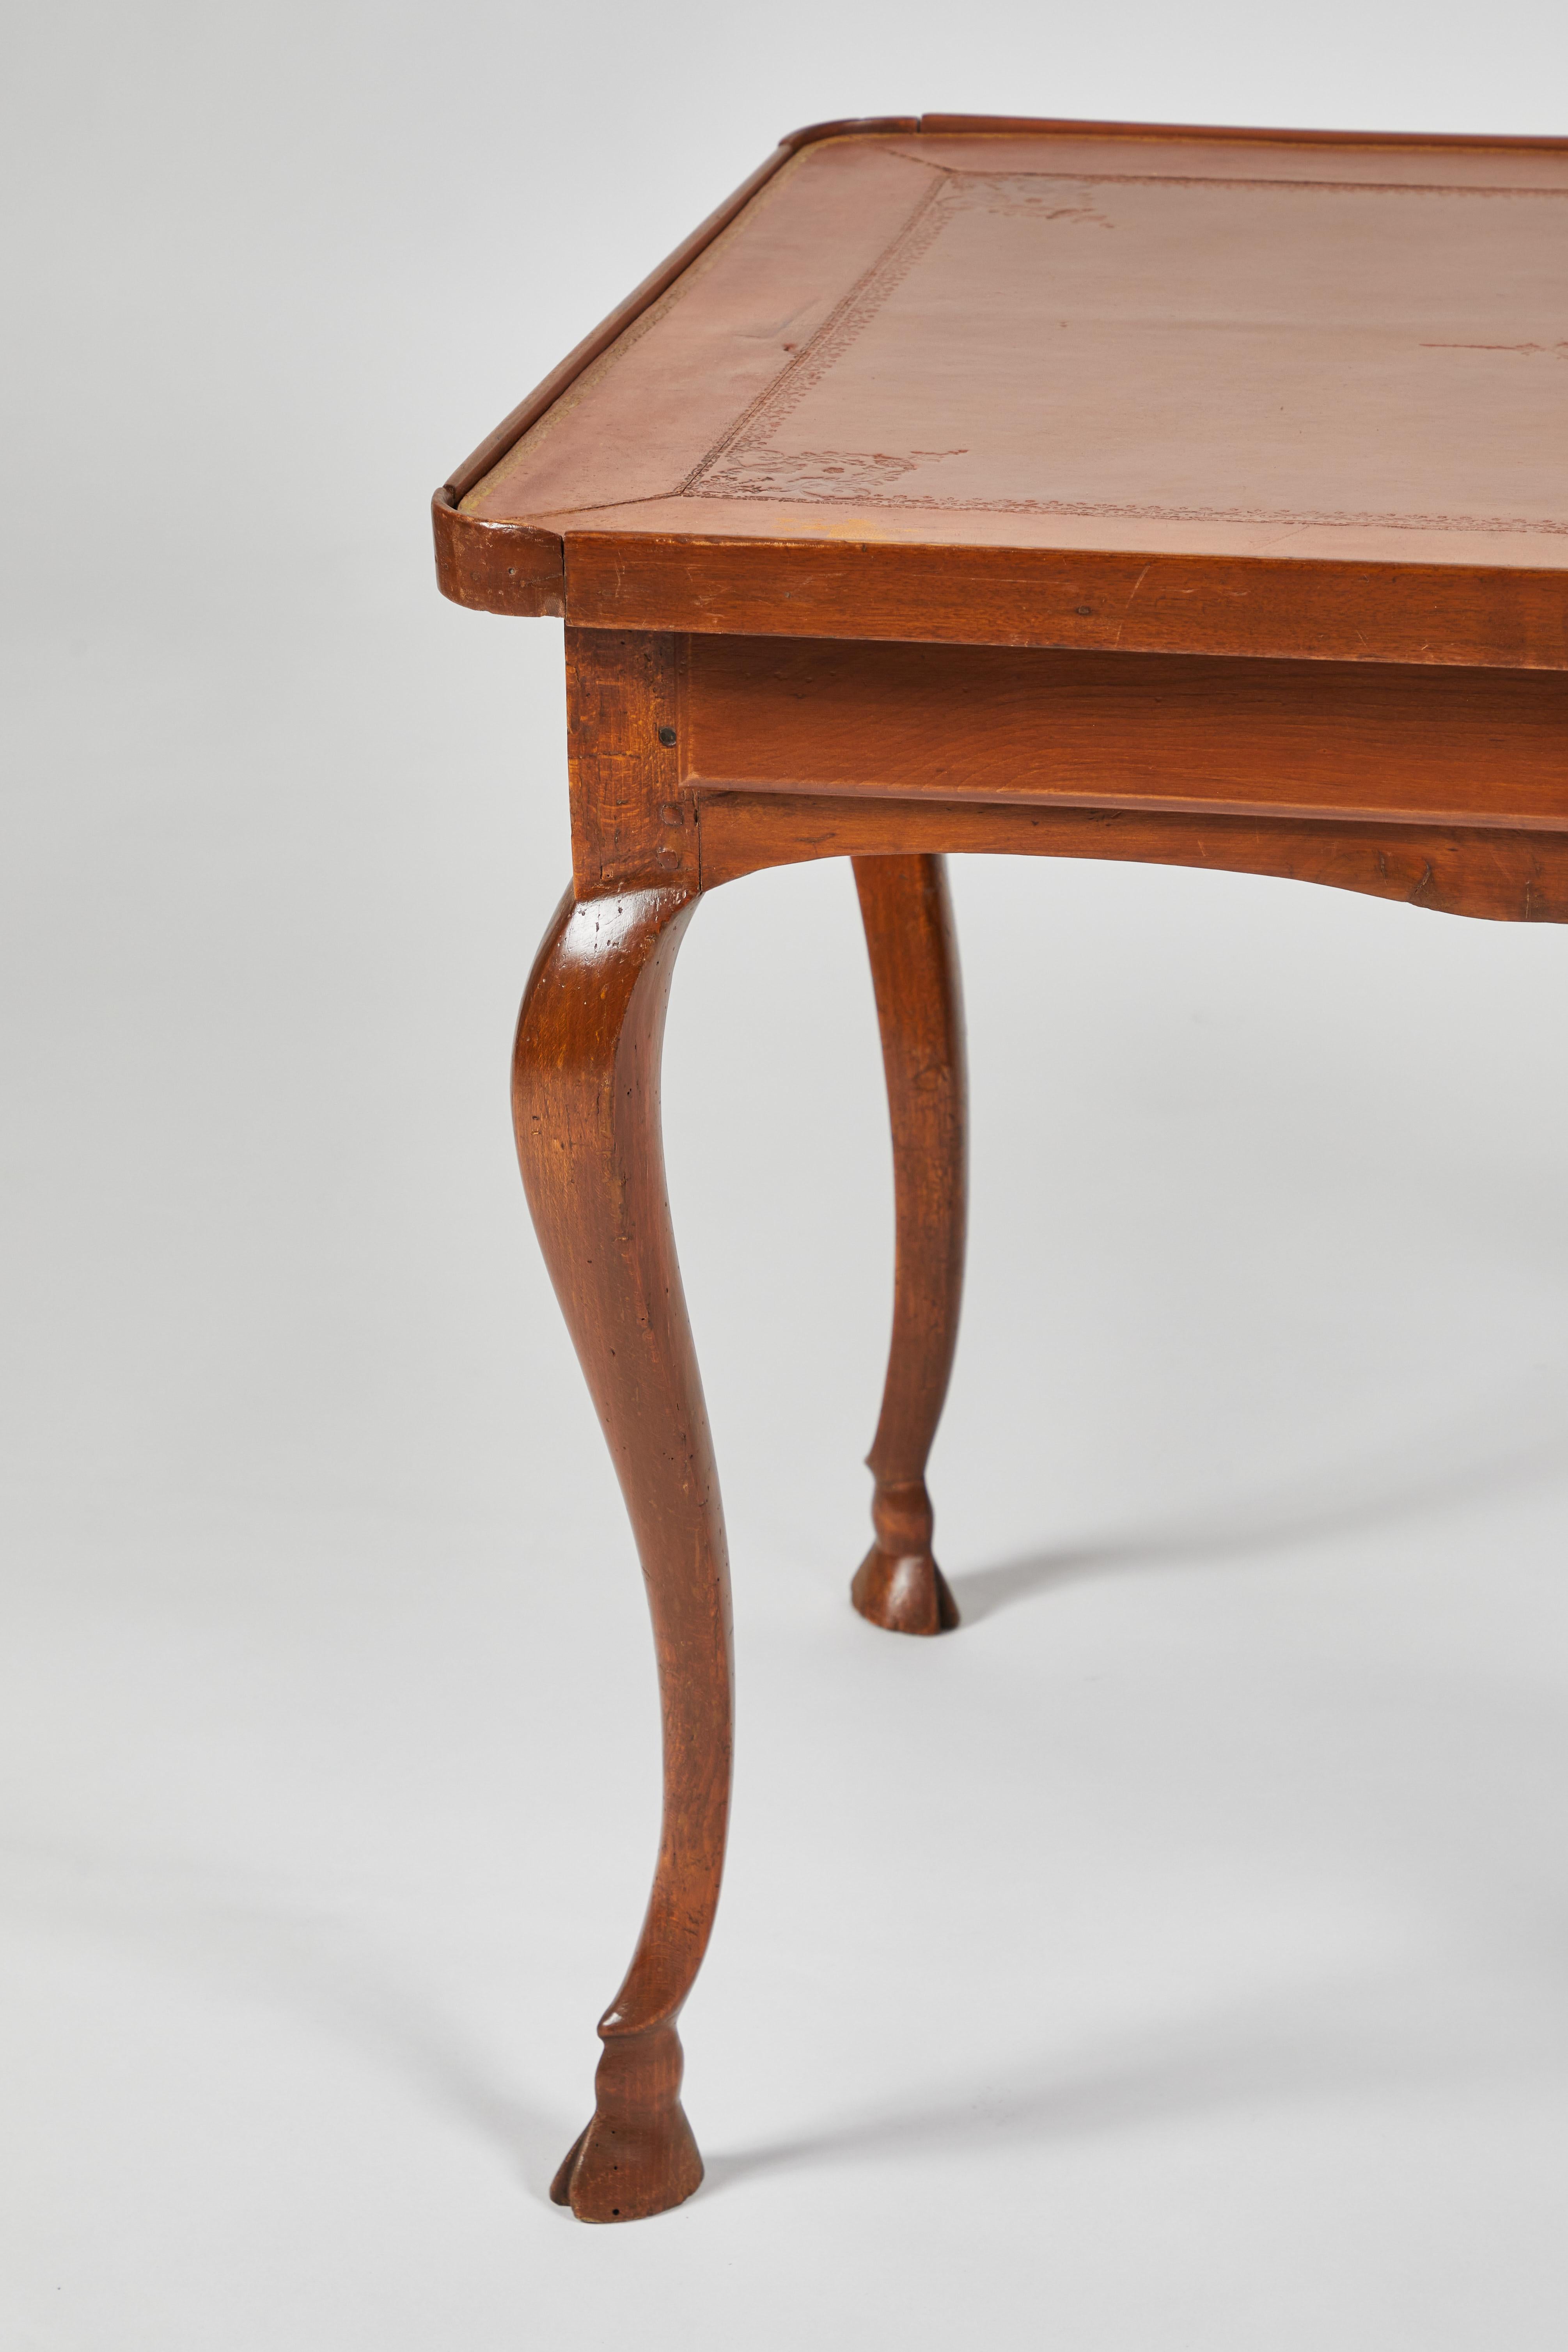 Continental rococo style walnut leather top writing table
This Italian late 18th early 19th century table features a leather tray style top above a shaped frieze with one drawer raised on slender cabriole legs ending in stylized hoof feet.